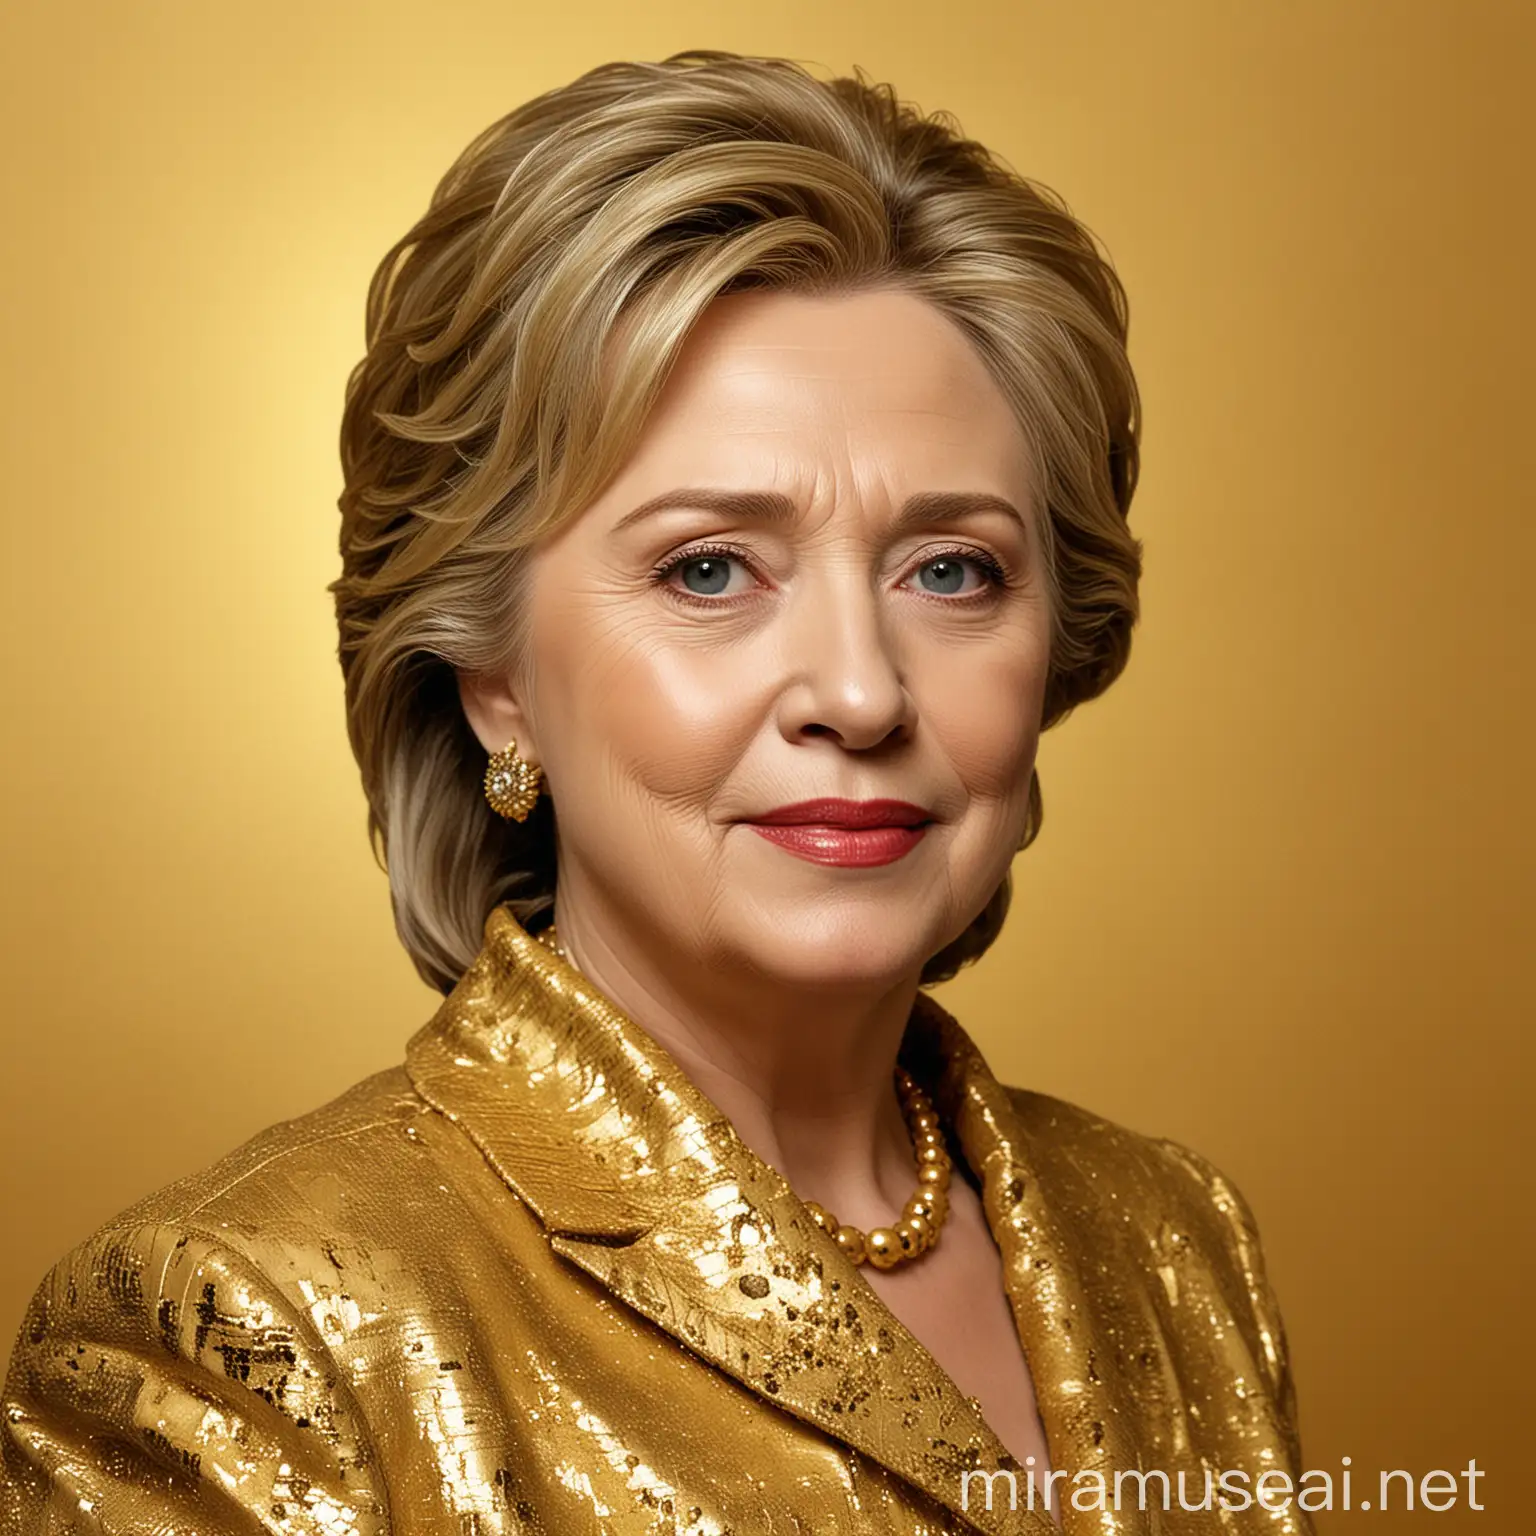 
HILARY CLINTON with gold background